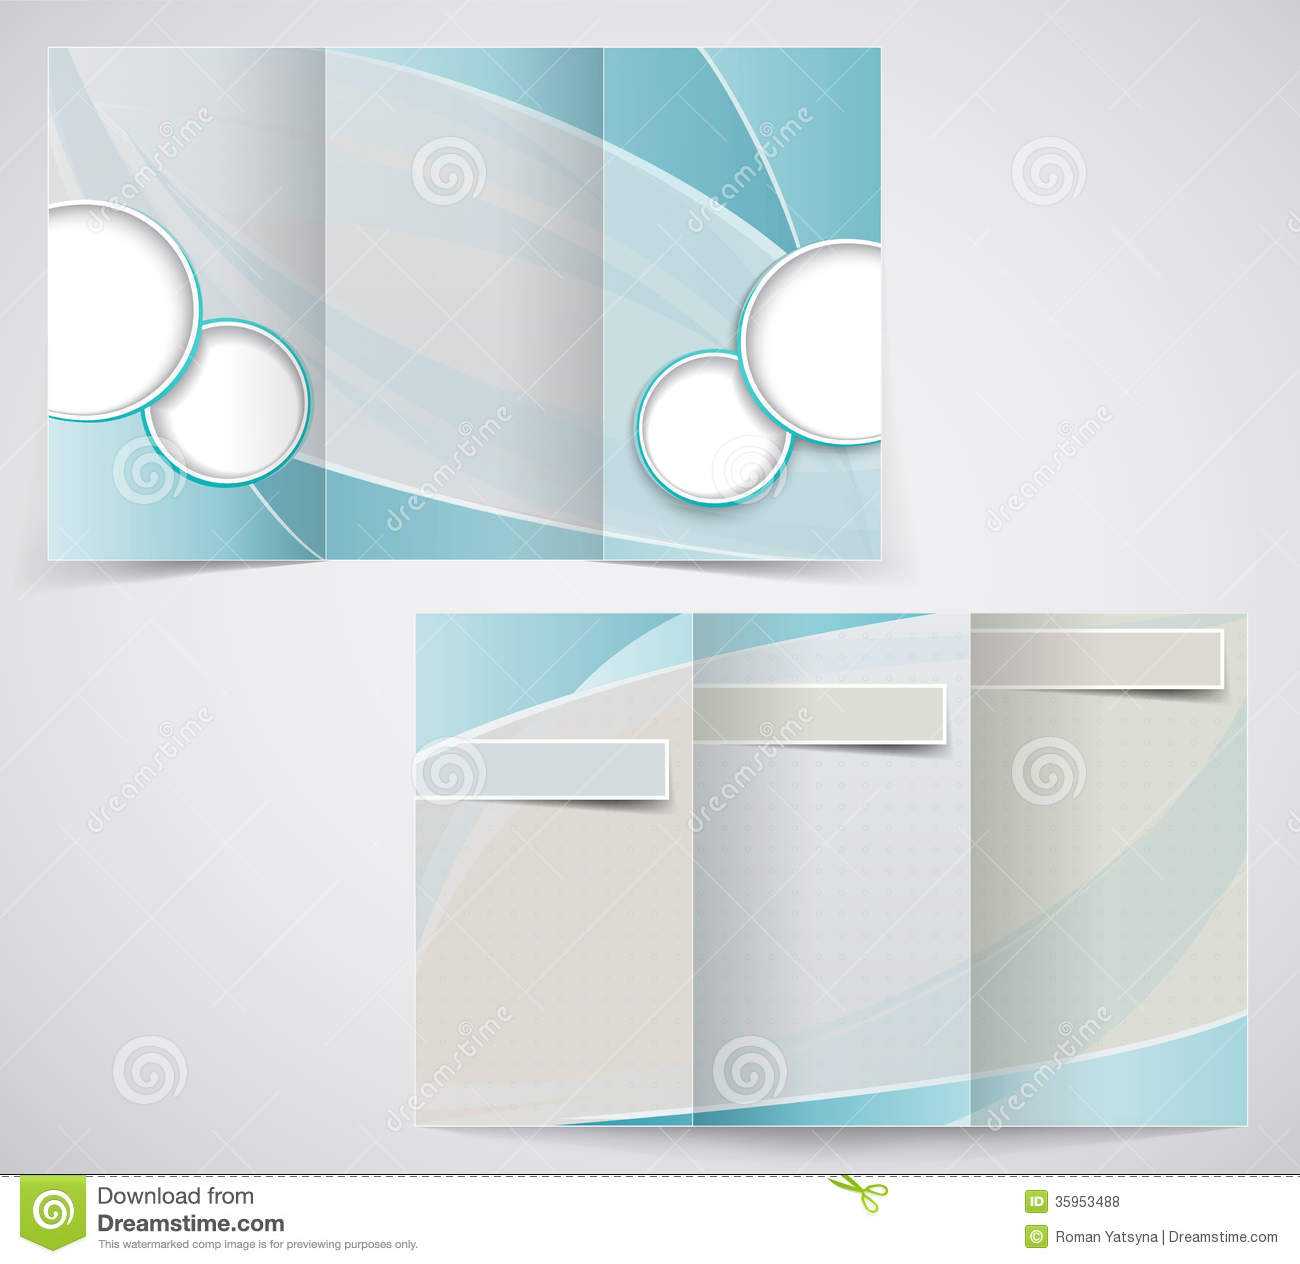 Blank Tri Fold Brochure Template Free Download – Colona.rsd7 Intended For Free Illustrator Brochure Templates Download